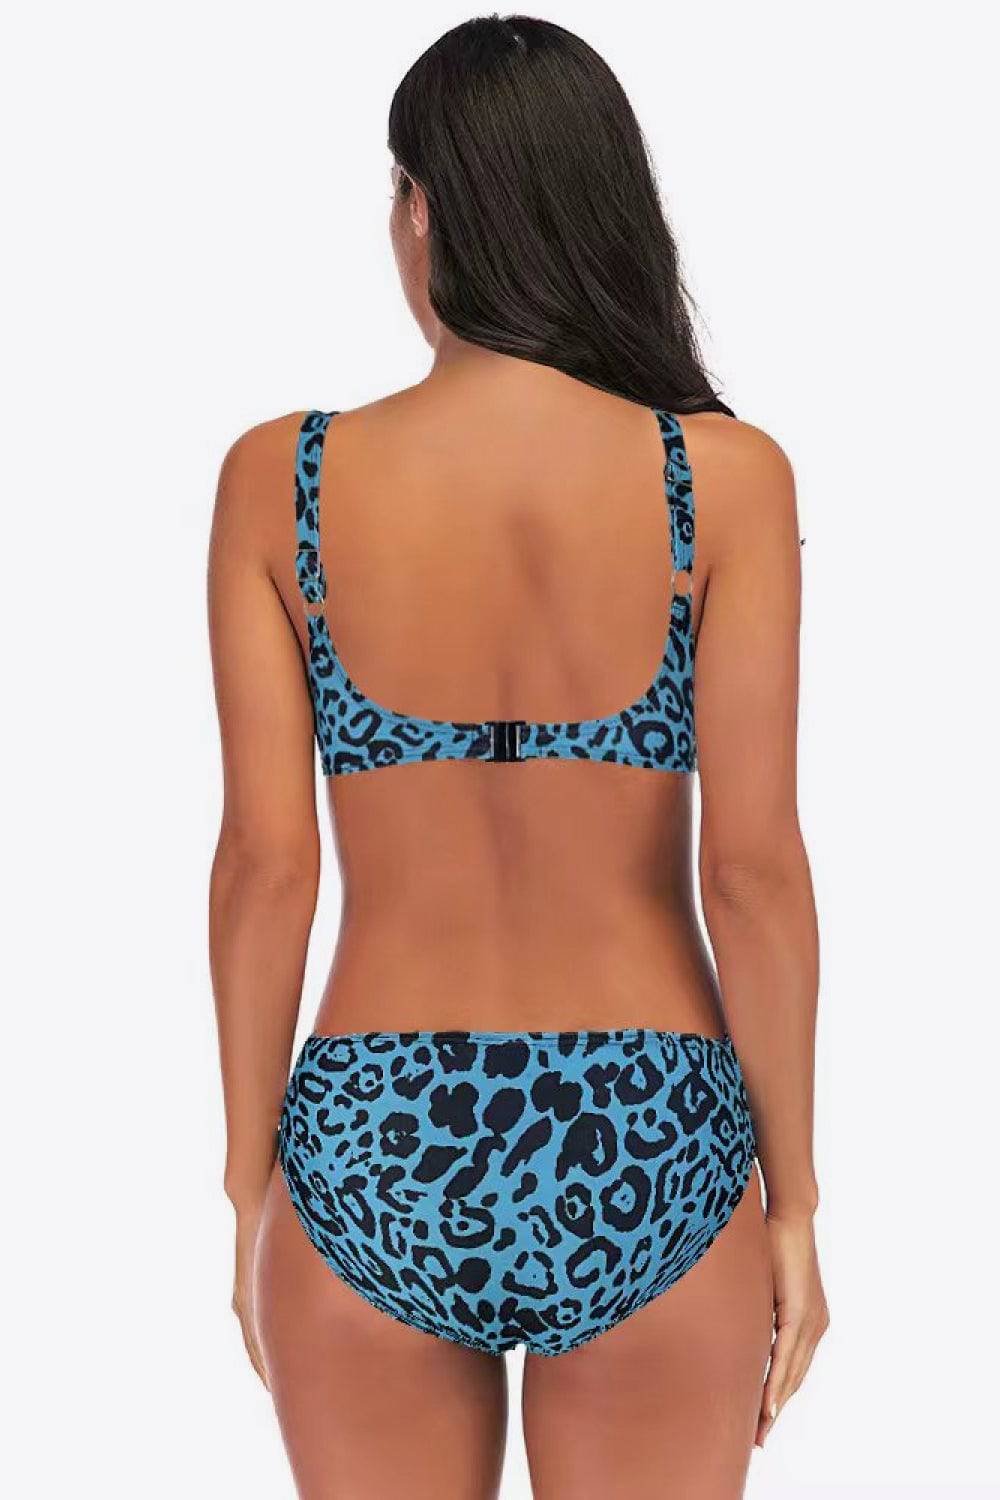 Leopard Love Bikini Set - Ignite Fiery Passions and Unleash Your Inner Goddess with Confidence - Guy Christopher